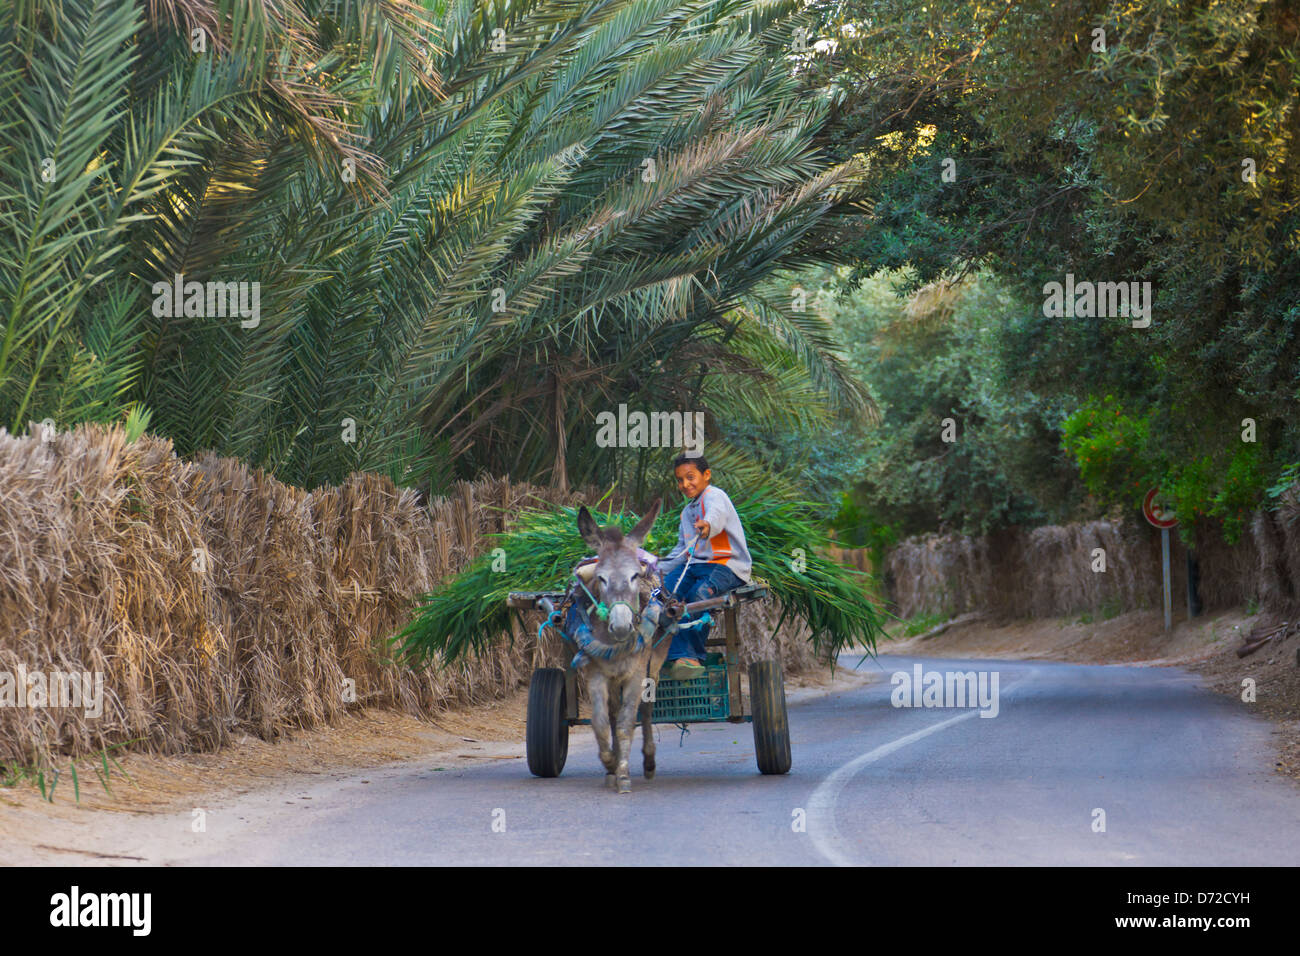 Donkey cart on road flanked by palm date trees in the oasis, Tozeur, Tunisia Stock Photo